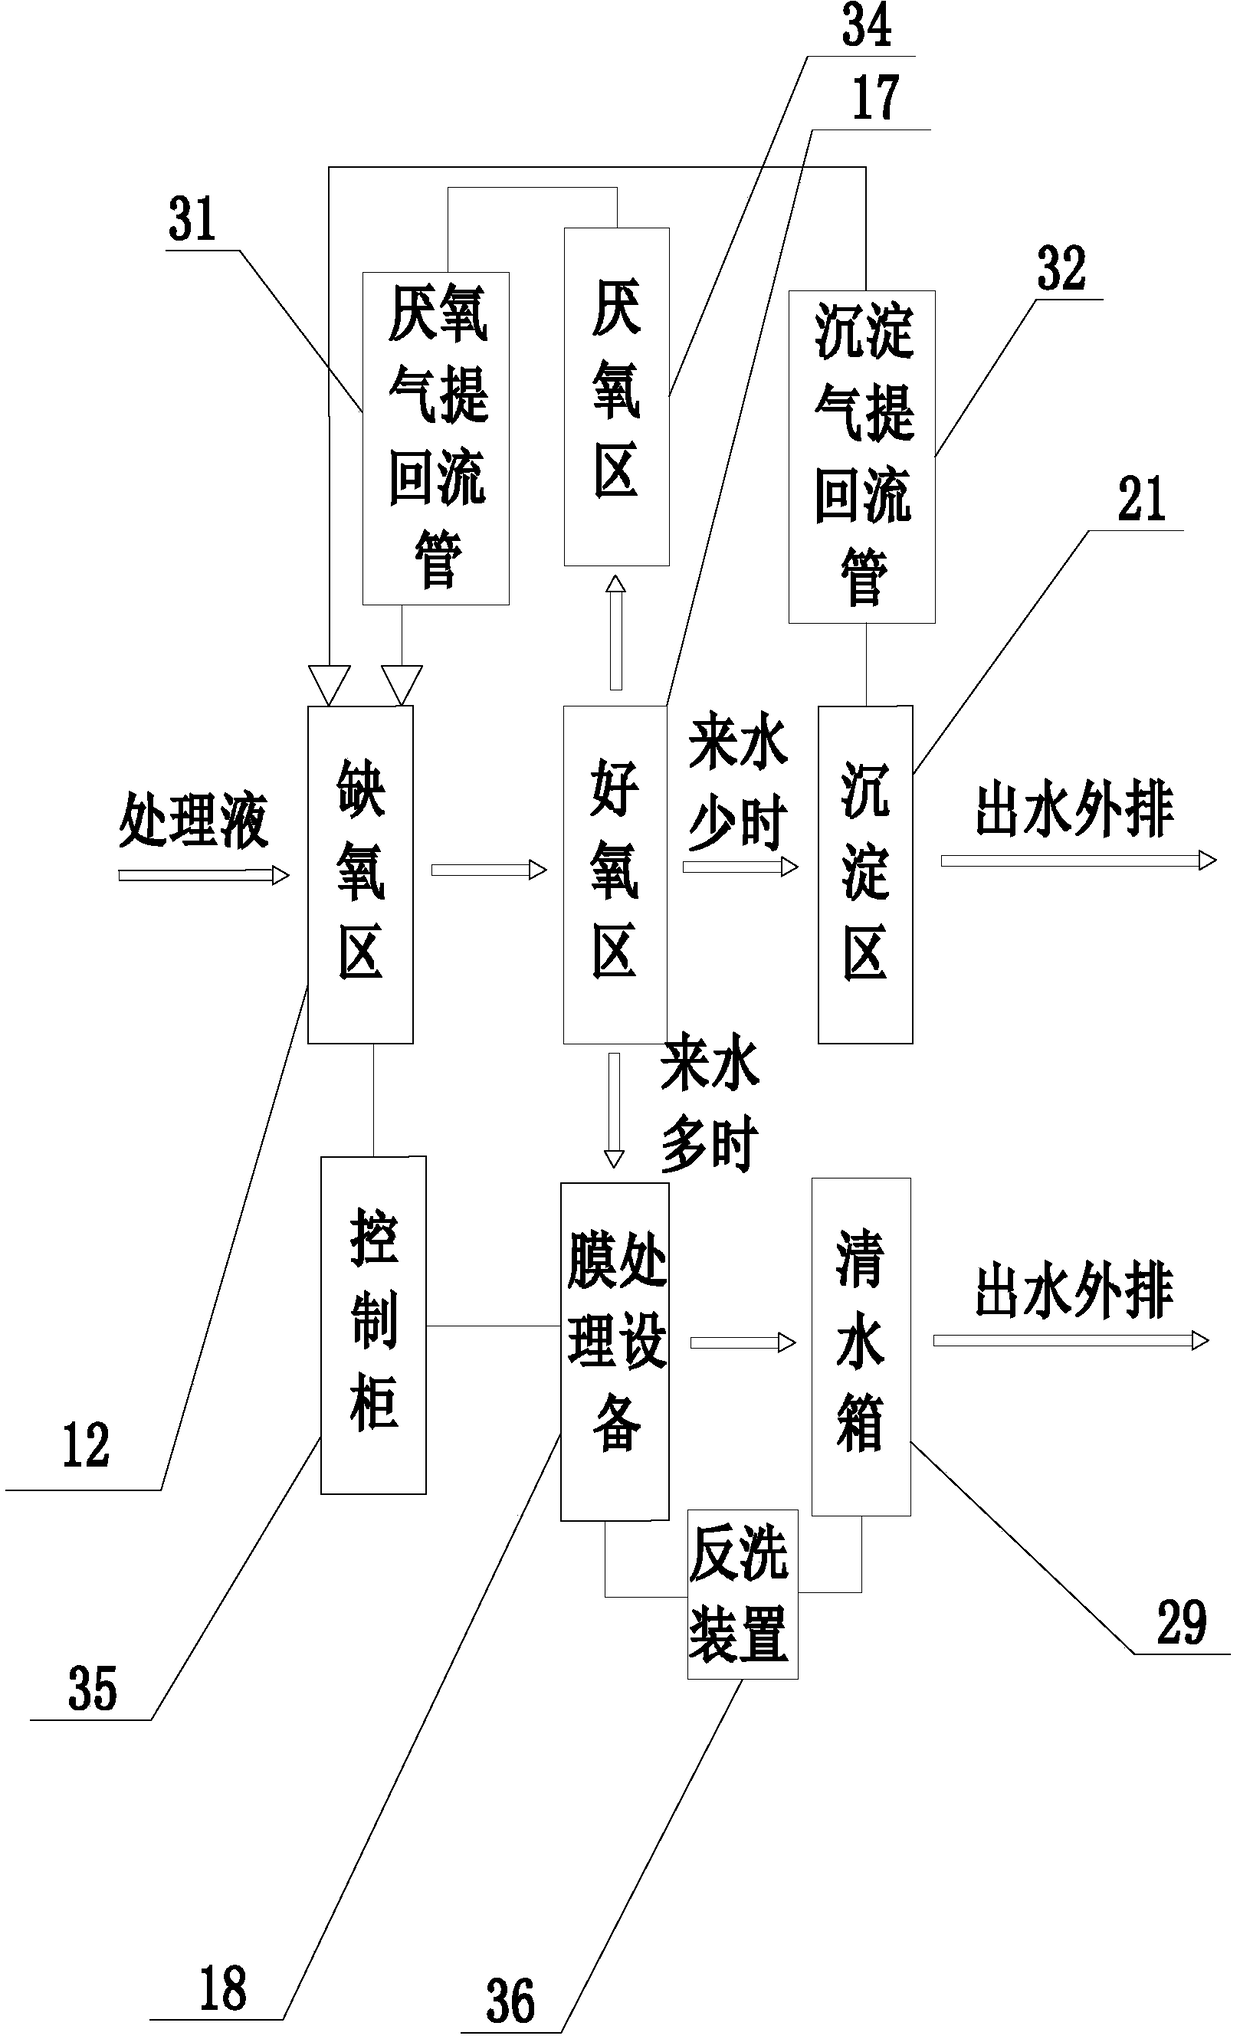 Multifunctional integrated sewage treatment device and method thereof